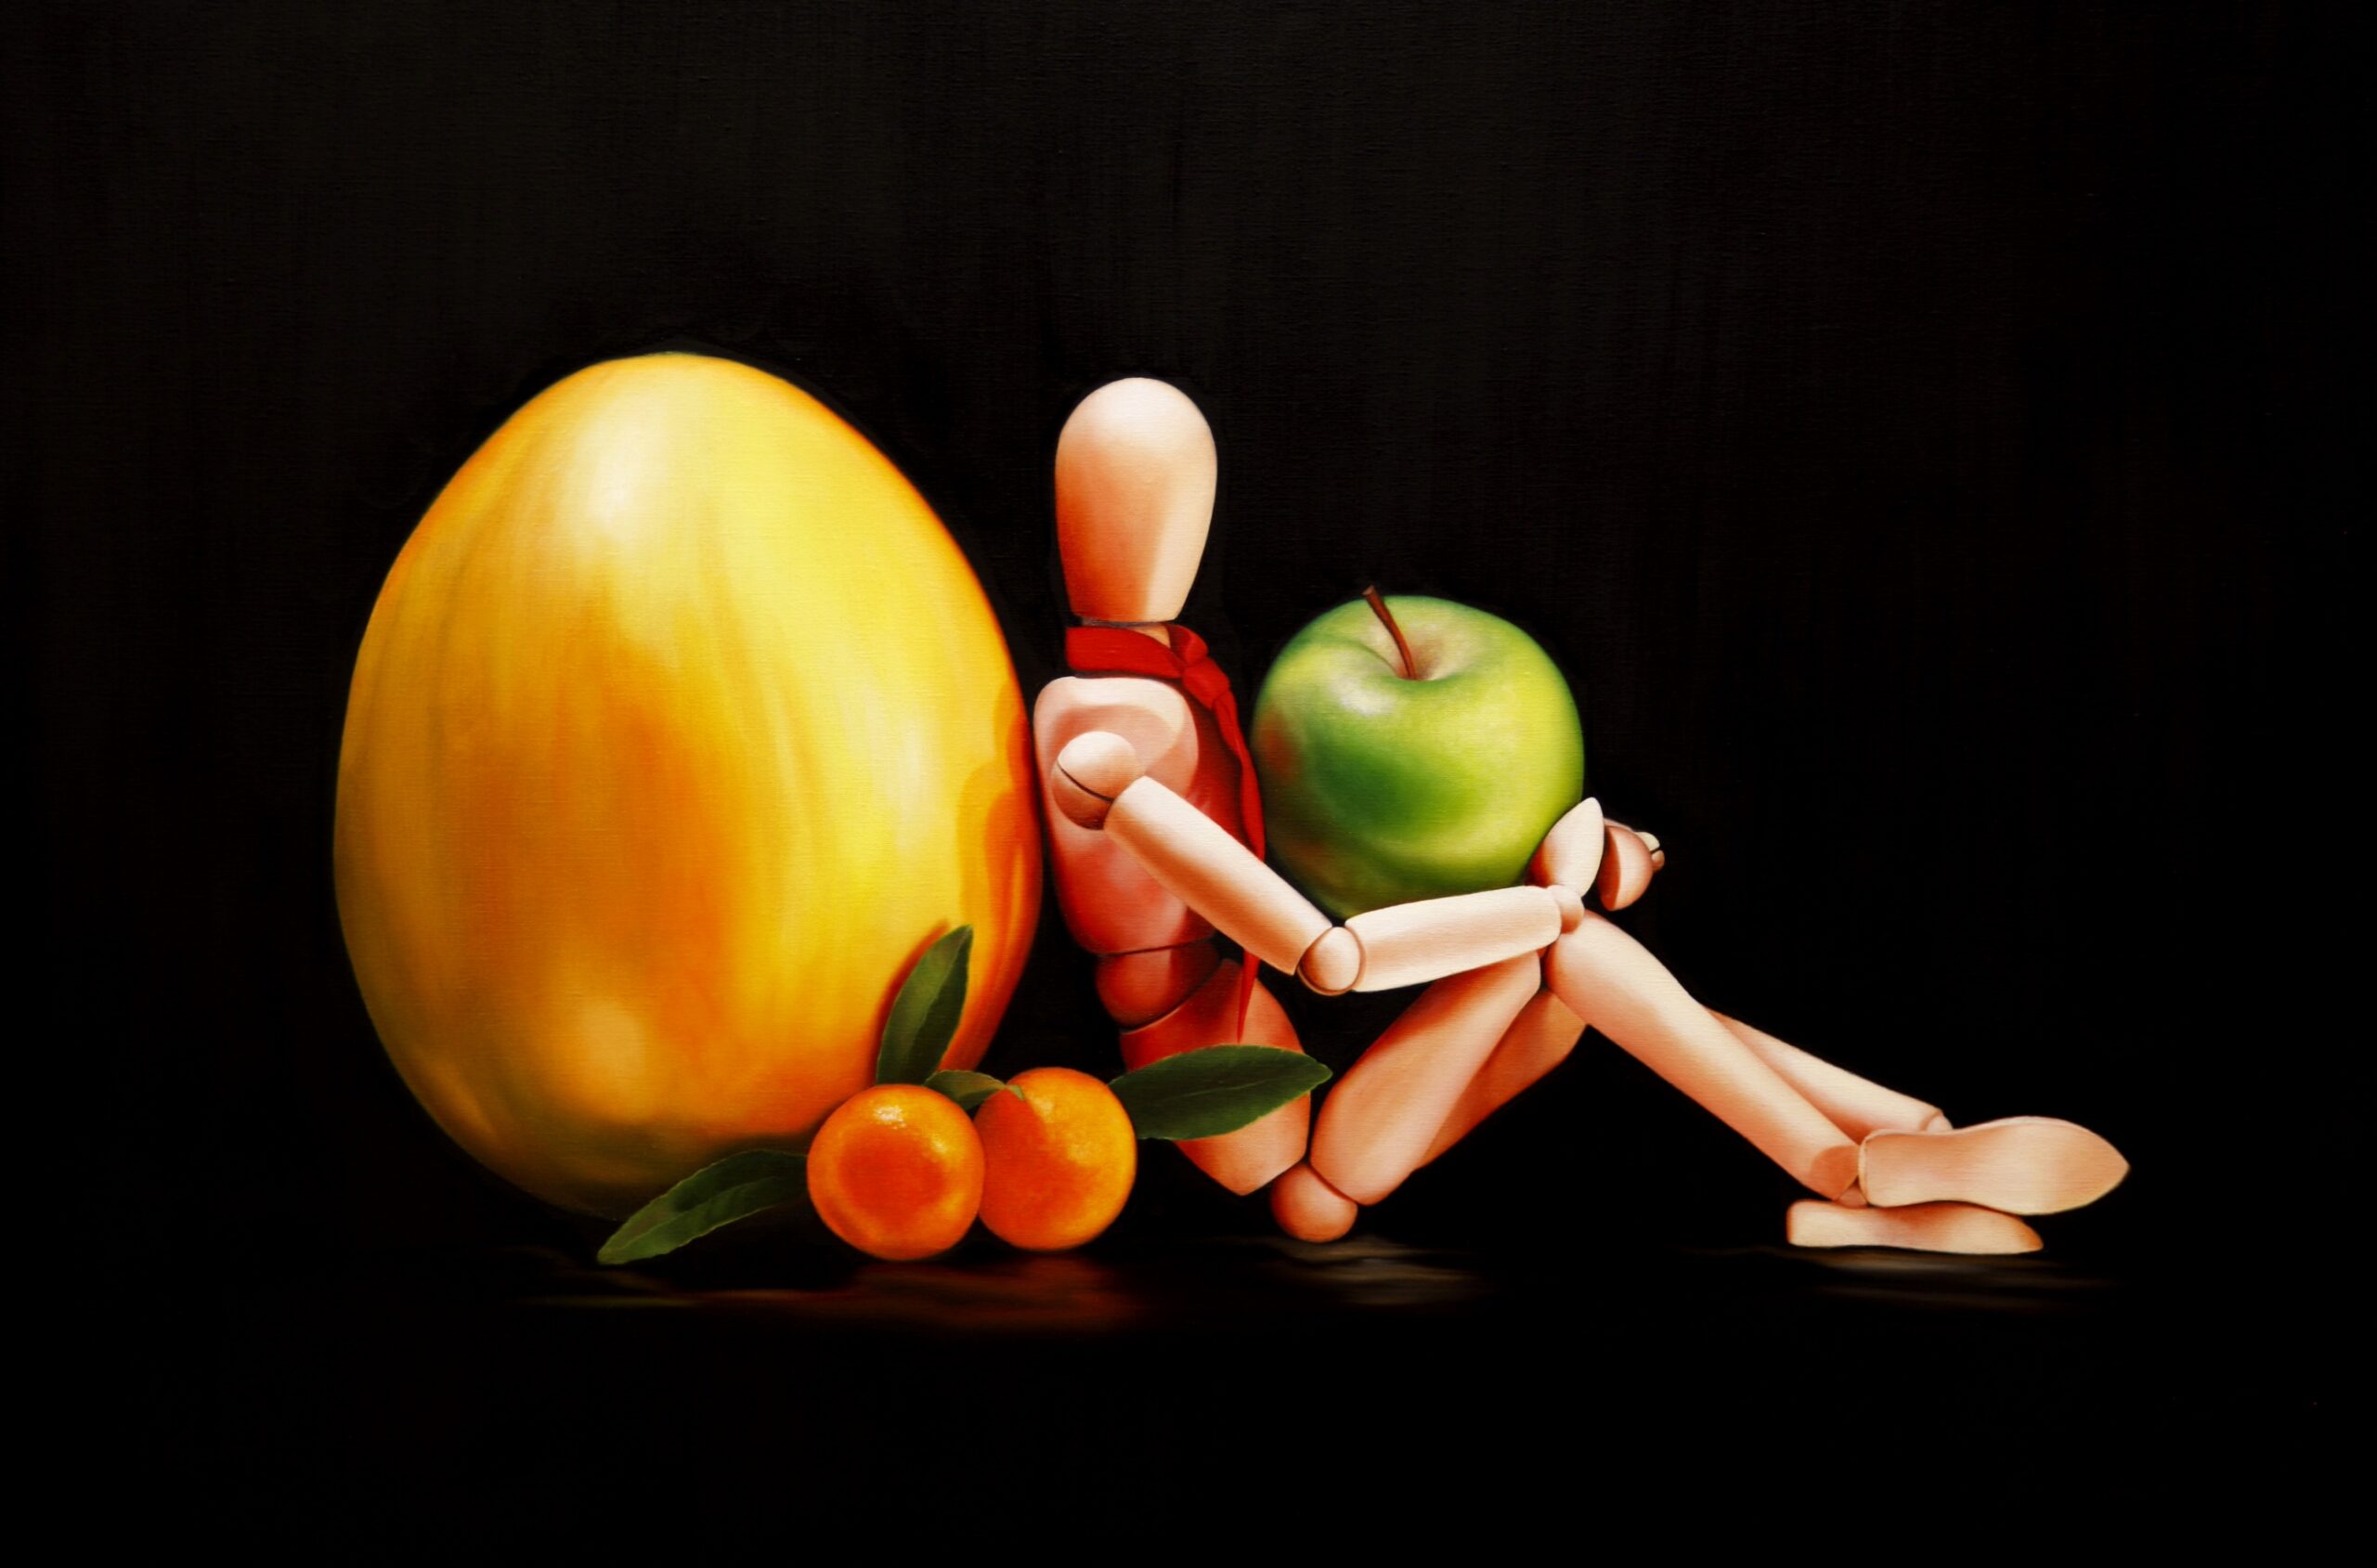 Otto Amid Fruits by Damir May